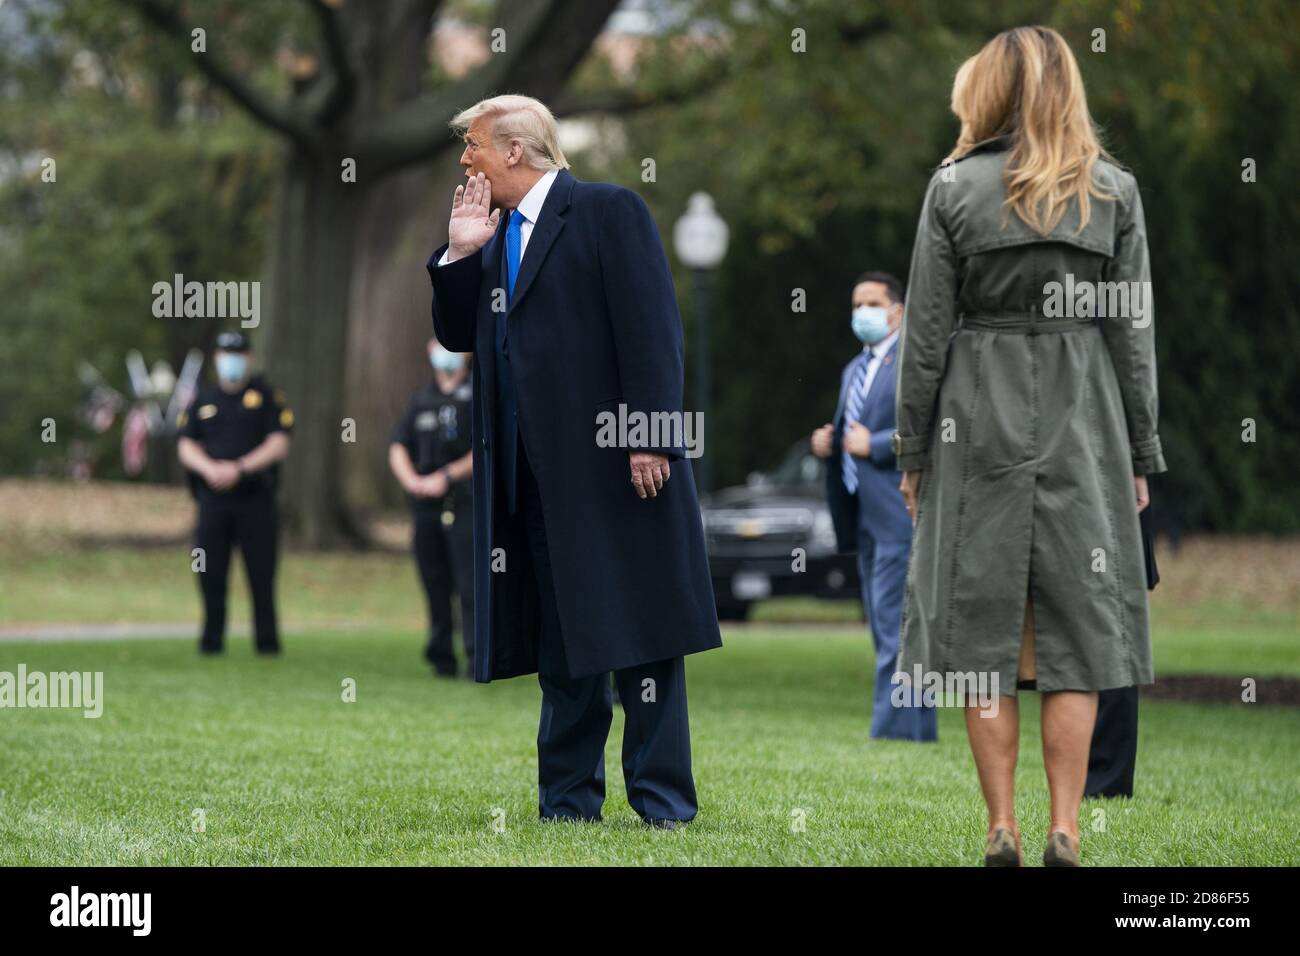 Washington, United States. 27th Oct, 2020. President Donald Trump and first lady Melania Trump depart the White House for the last week of campaigning, on Tuesday, October 27, 2020 in Washington, DC. The national election is on November 3rd. Photo by Jim Lo Scalzo Credit: UPI/Alamy Live News Stock Photo